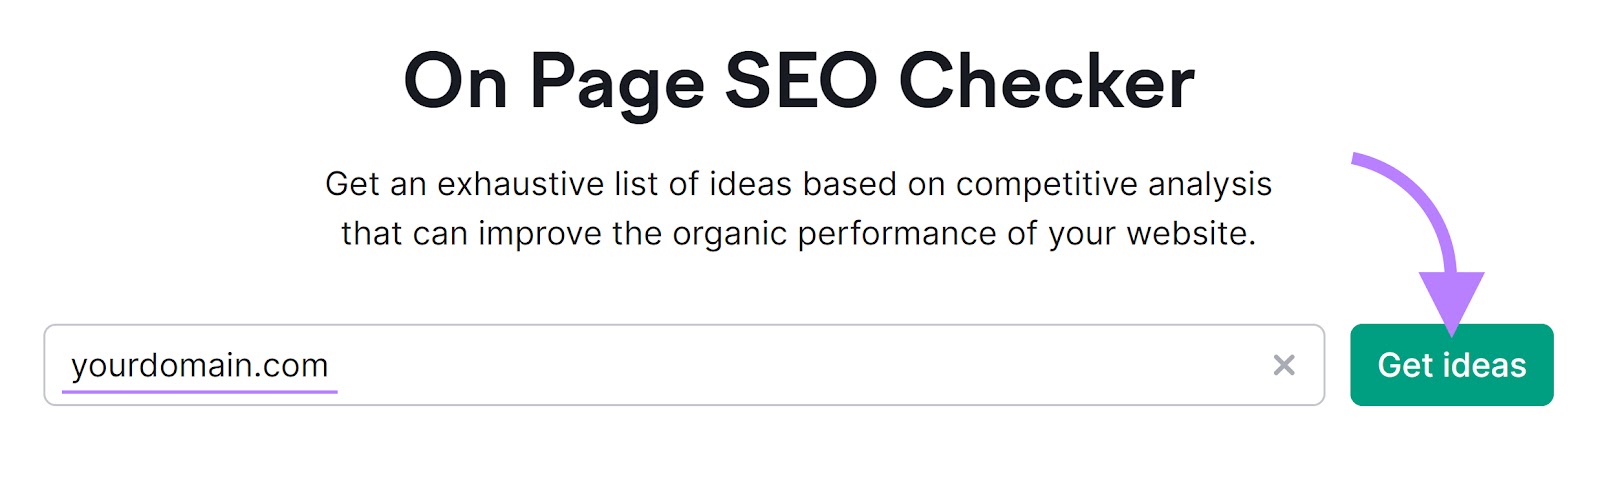 On Page SEO Checker "Pages and target keywords" tab with the location drop-down menu and "Continue" button highlighted.